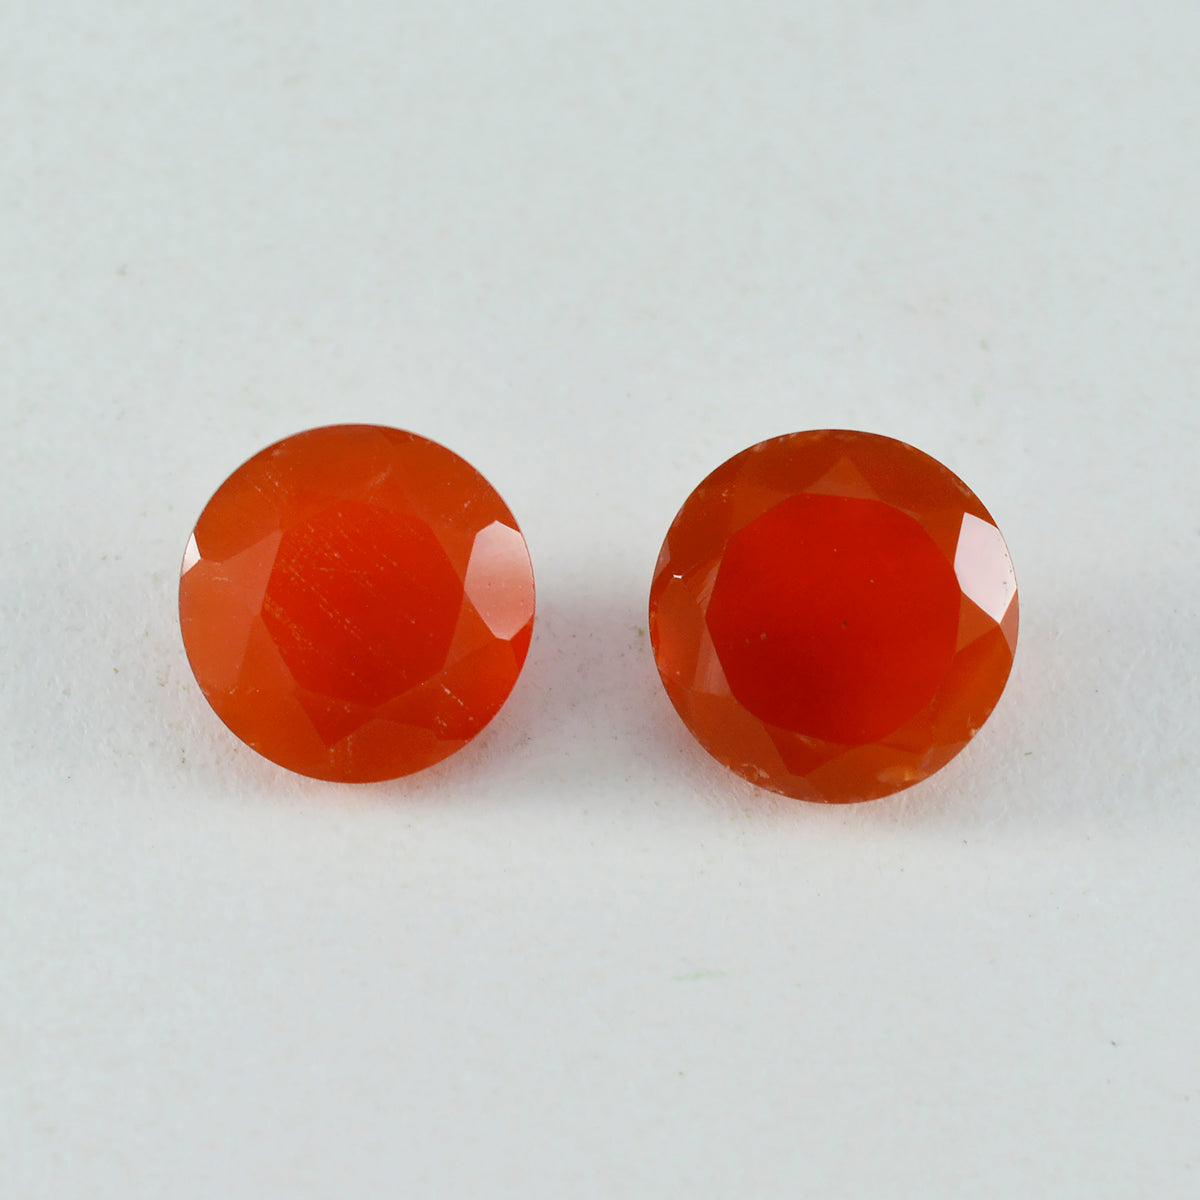 Riyogems 1PC Natural Red Onyx Faceted 14x14 mm Round Shape handsome Quality Loose Gemstone